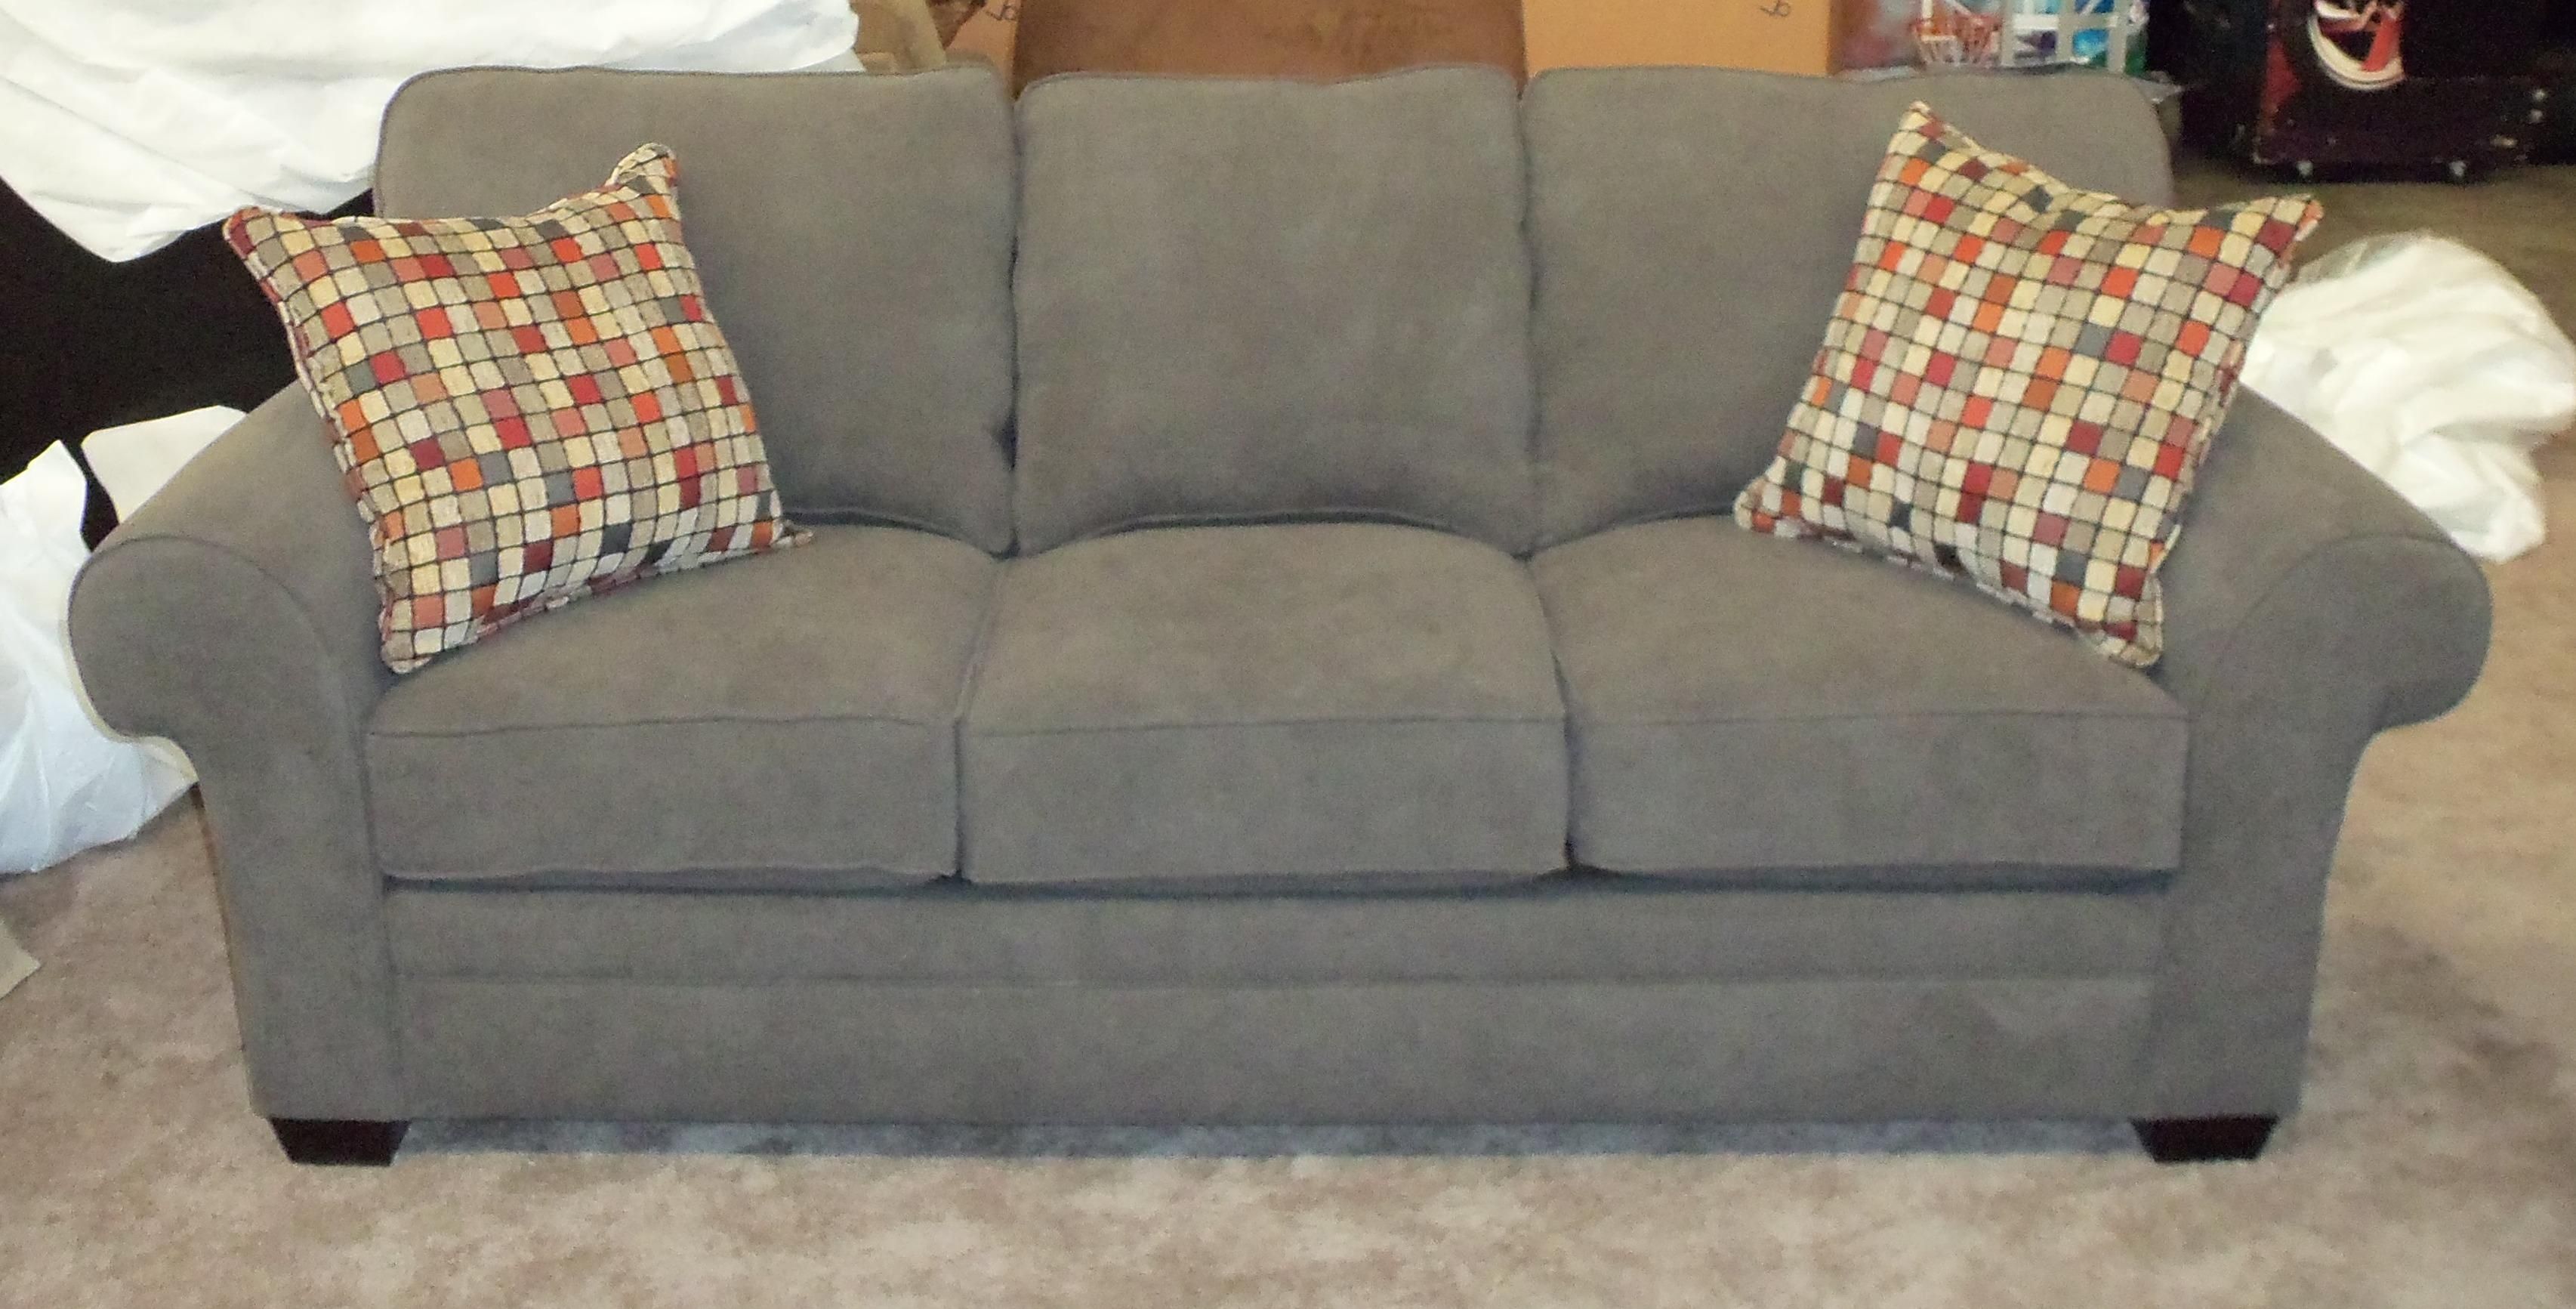 Broyhill Zachary Sofa With Inspiration Photo 10680 | Kengire Intended For Broyhill Harrison Sofas (View 10 of 20)